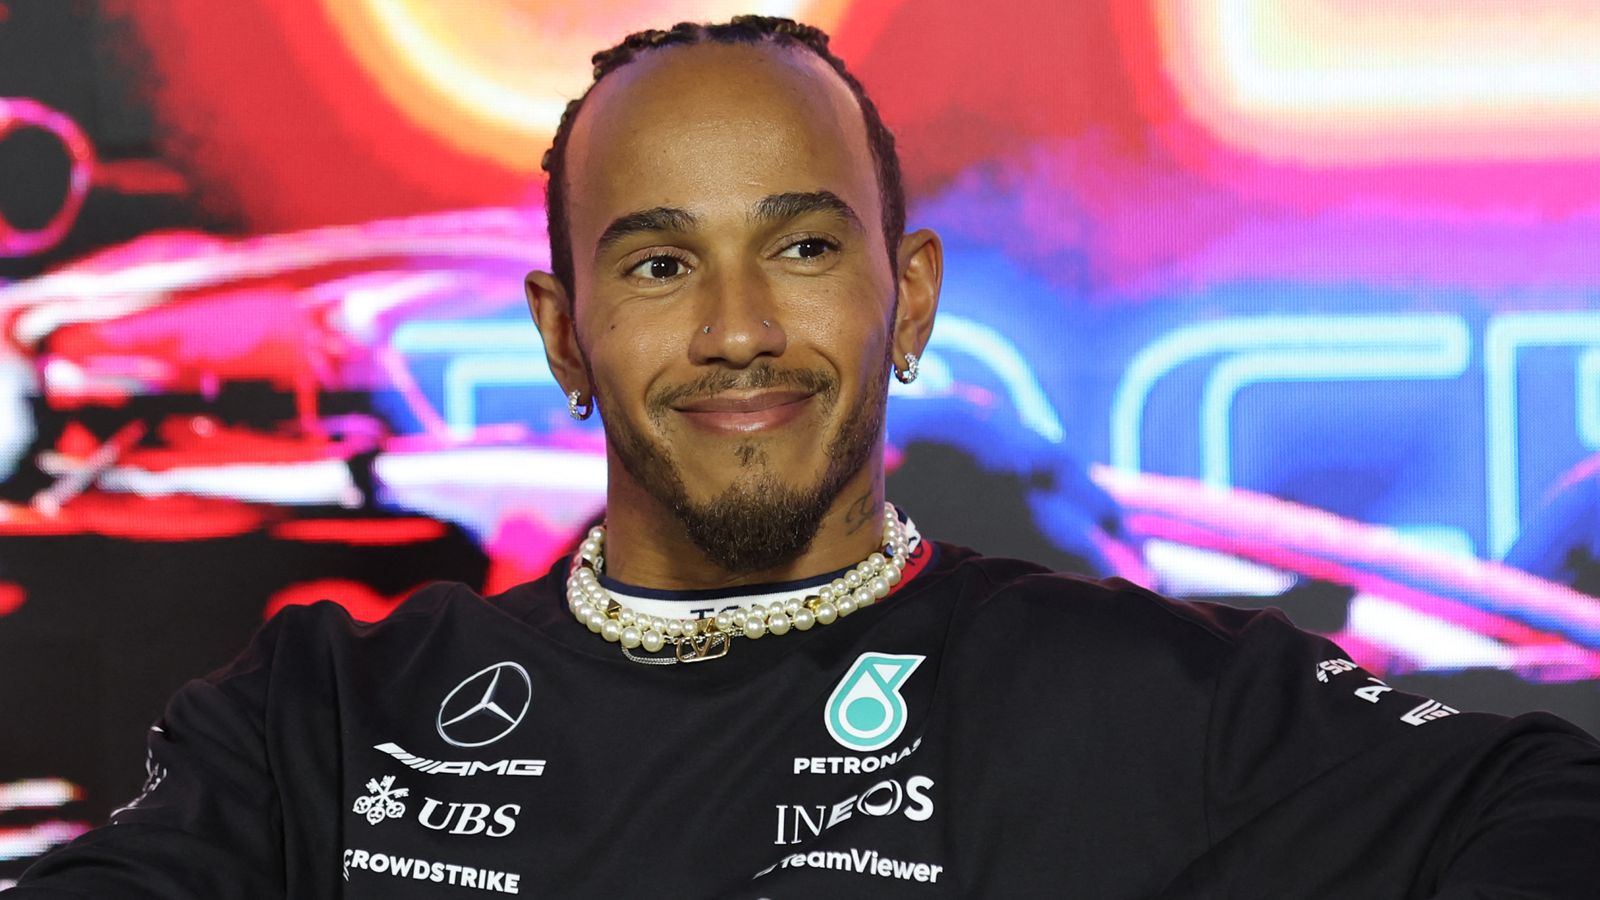 Lewis Hamilton to leave Mercedes after 'amazing 11 years' and move